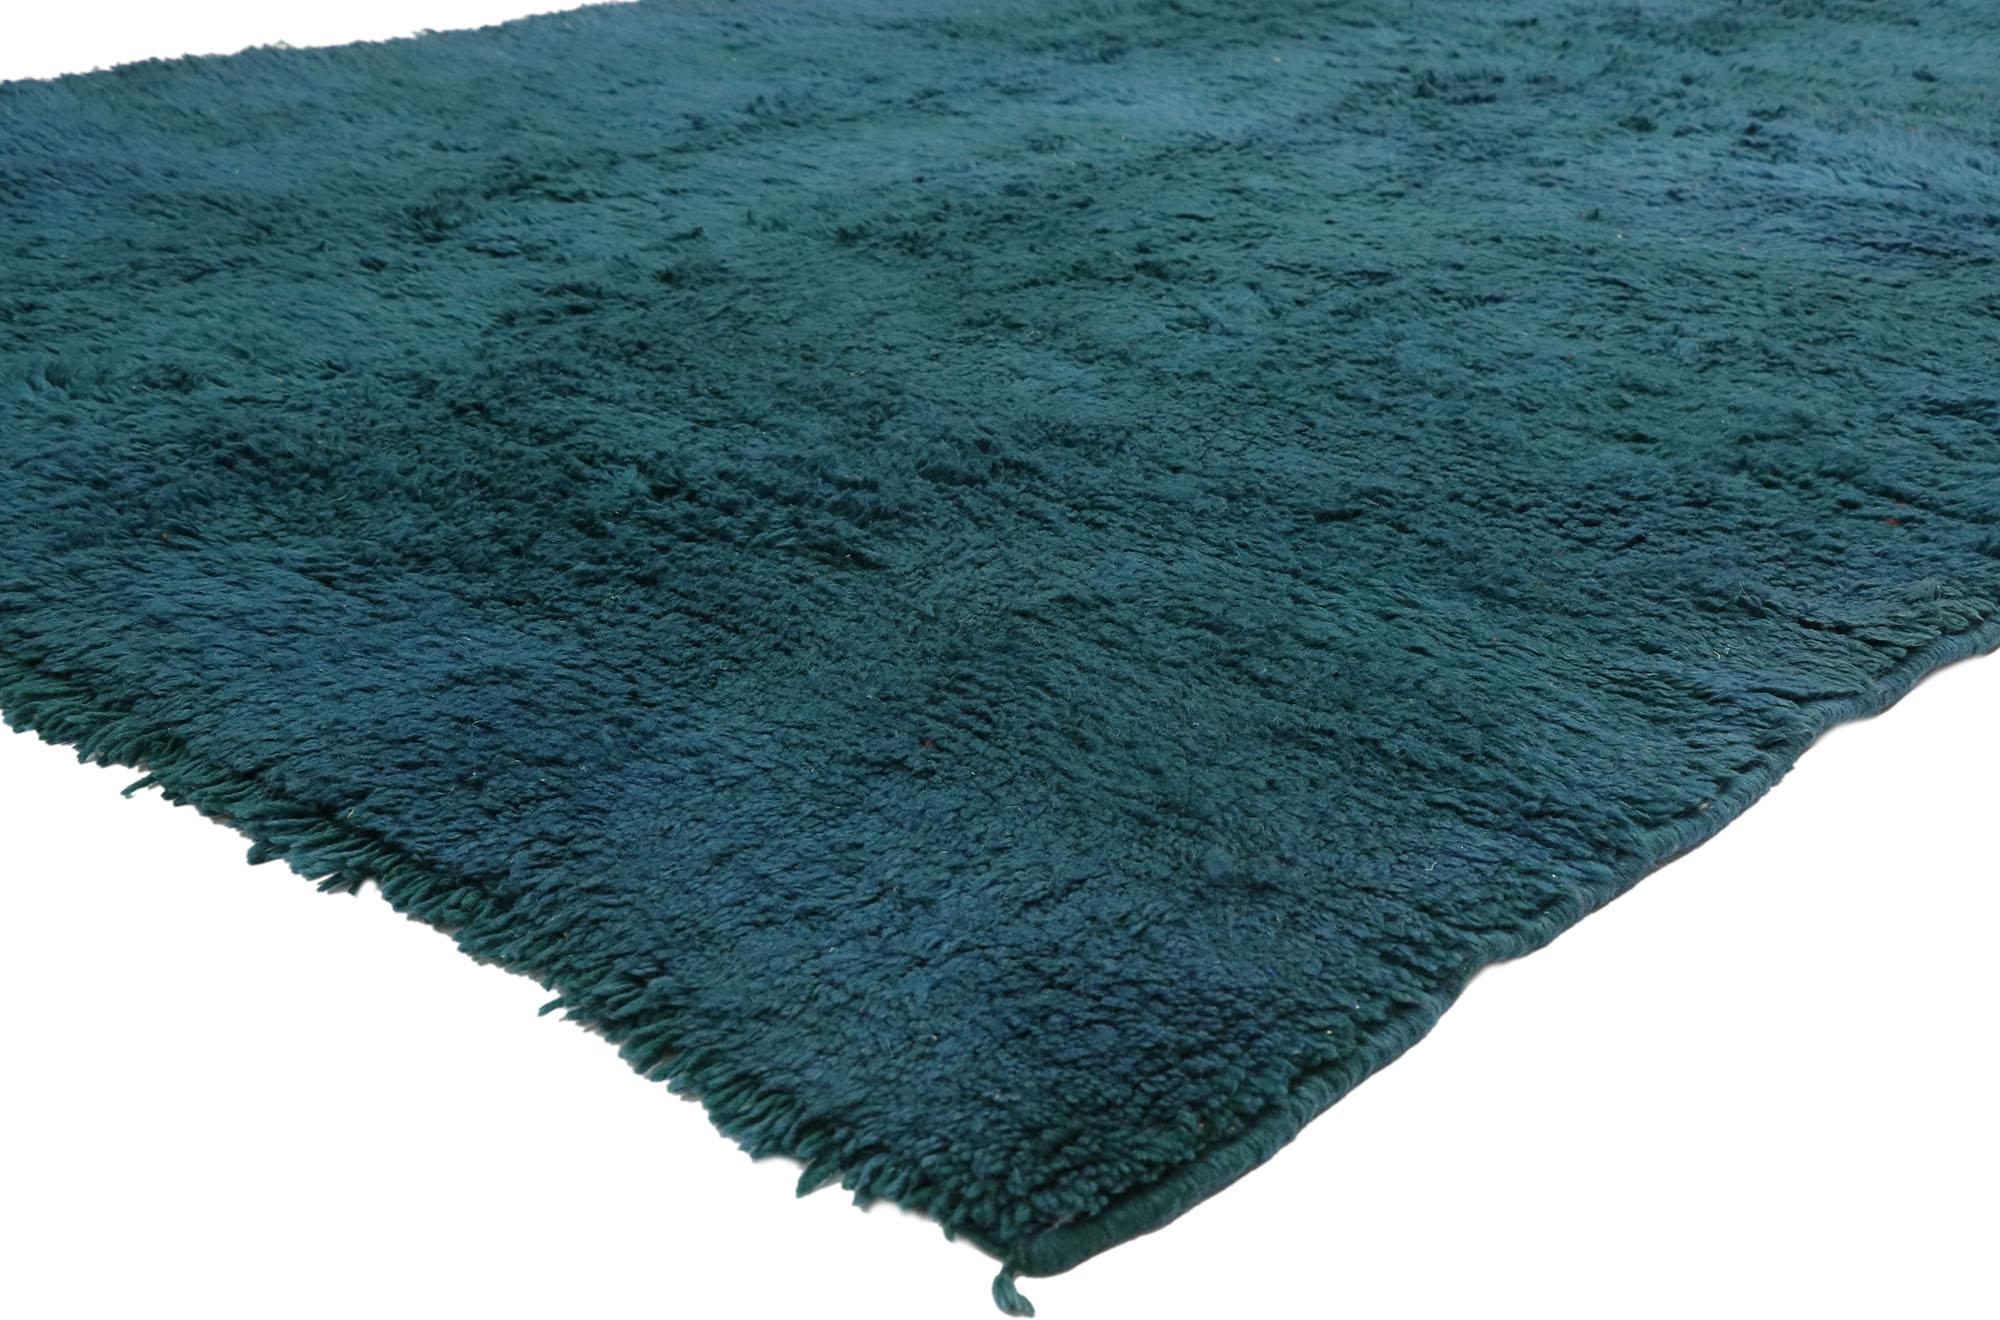 20918, Vintage Berber Moroccan Rug with Mid-Century Modern Style Contemporary Style. Effortless, elegant, and casual meets the eye in this hand knotted wool vintage Berber Moroccan rug. It features vibrant peacock blue hues and softly gradated